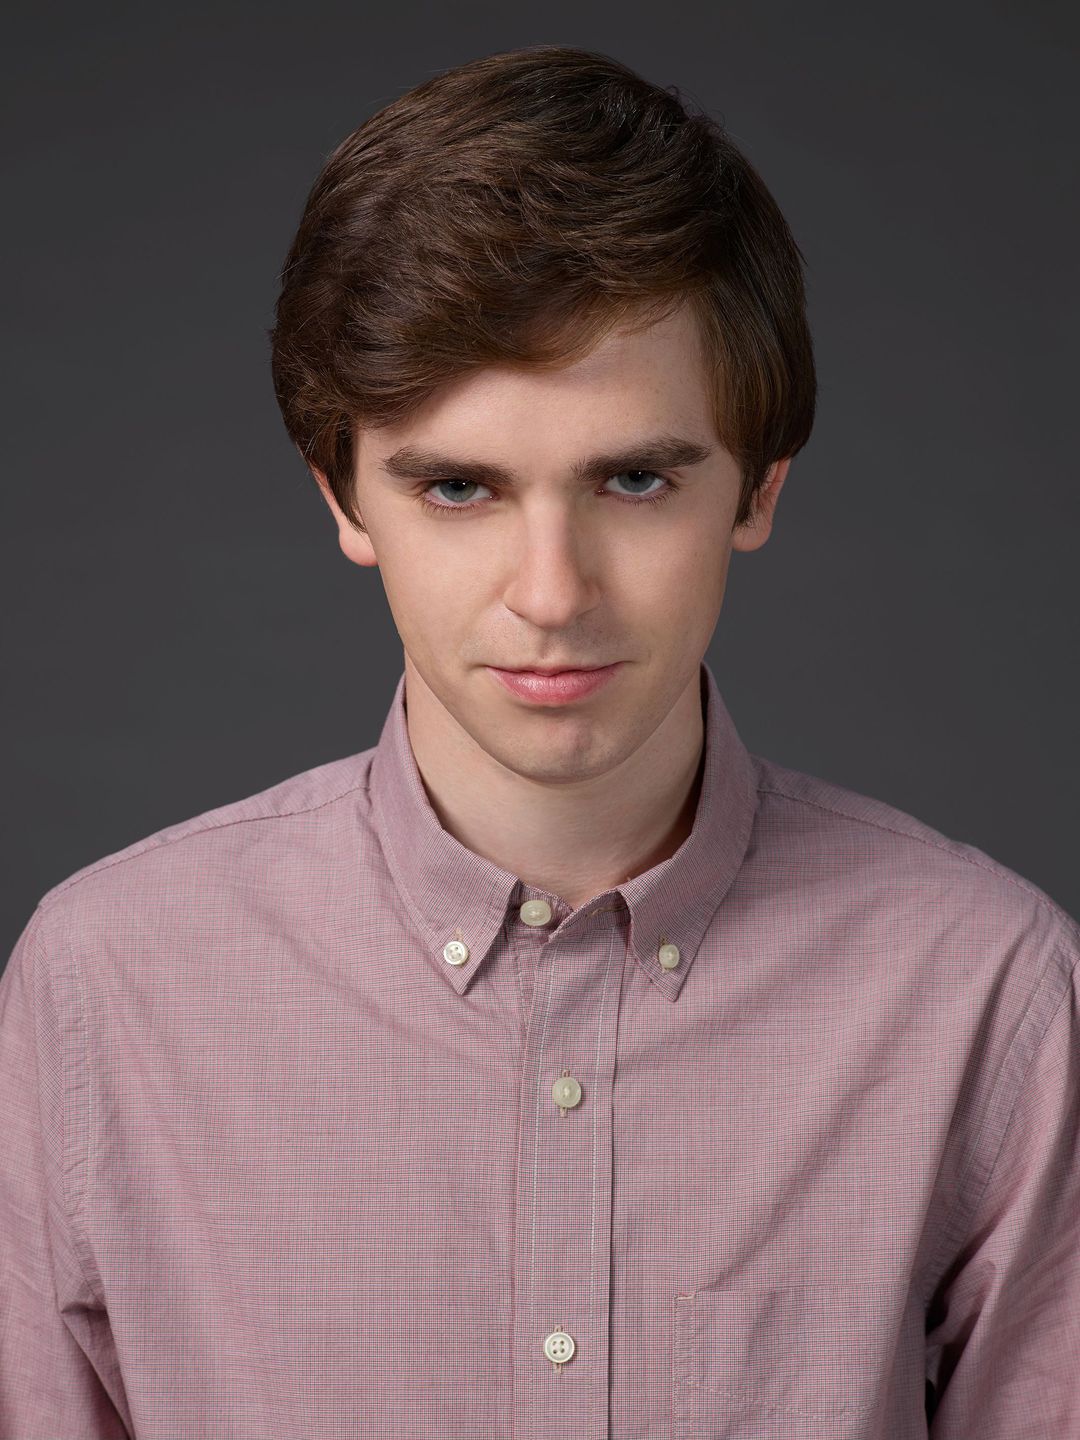 Freddie Highmore how old is he